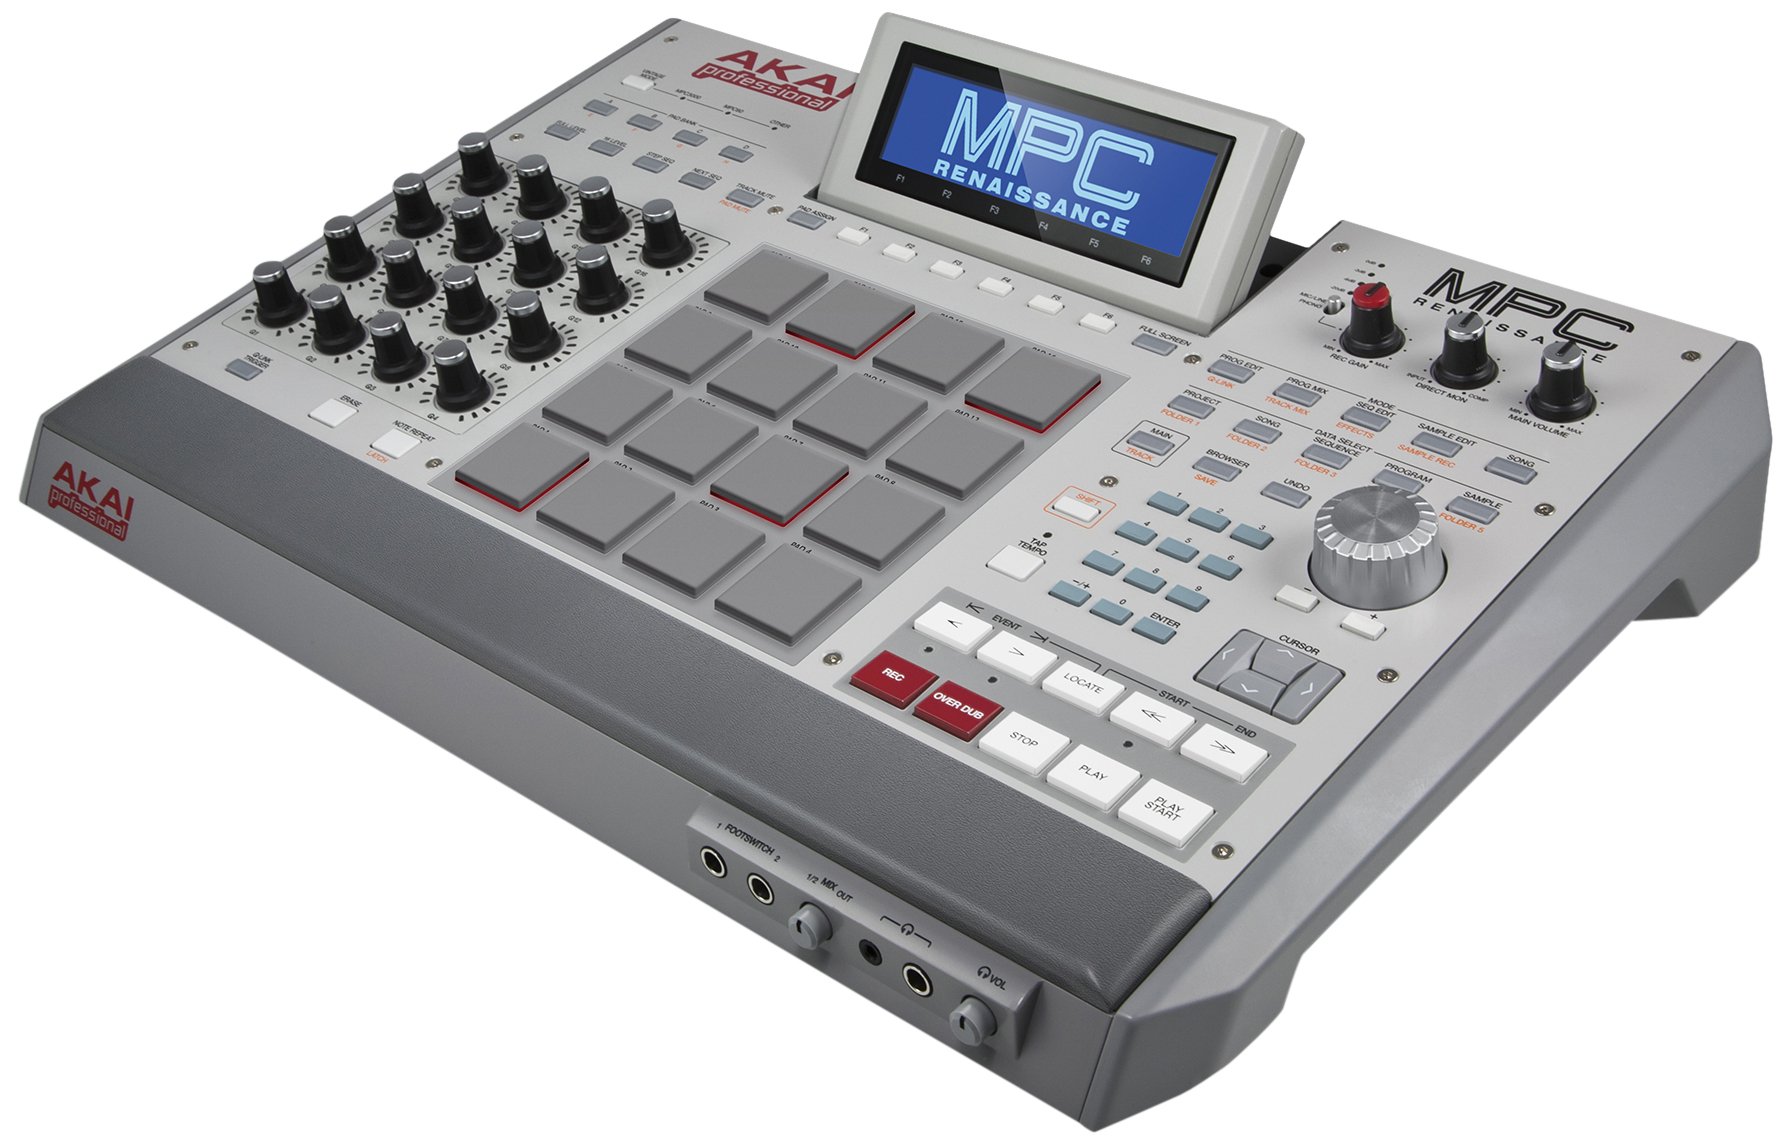 Akai Professional MPC Renaissance. Music Production Controller With 9GB+ Sound Library Download (24 Bit / 96 KHz), Musical Instruments